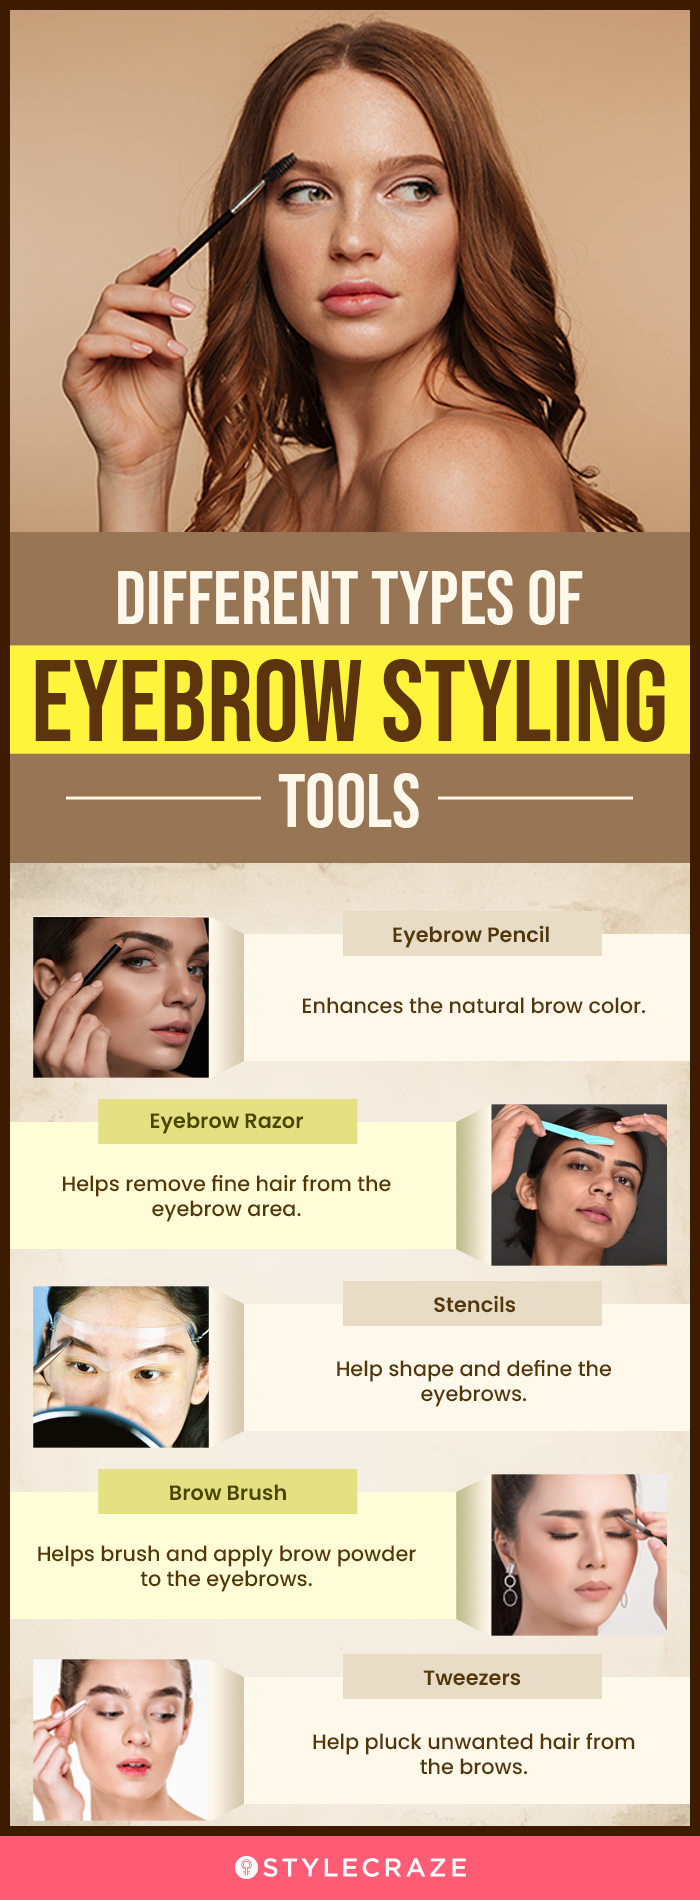 How To Choose An Eyebrow Shape For Your Face Type & Tips